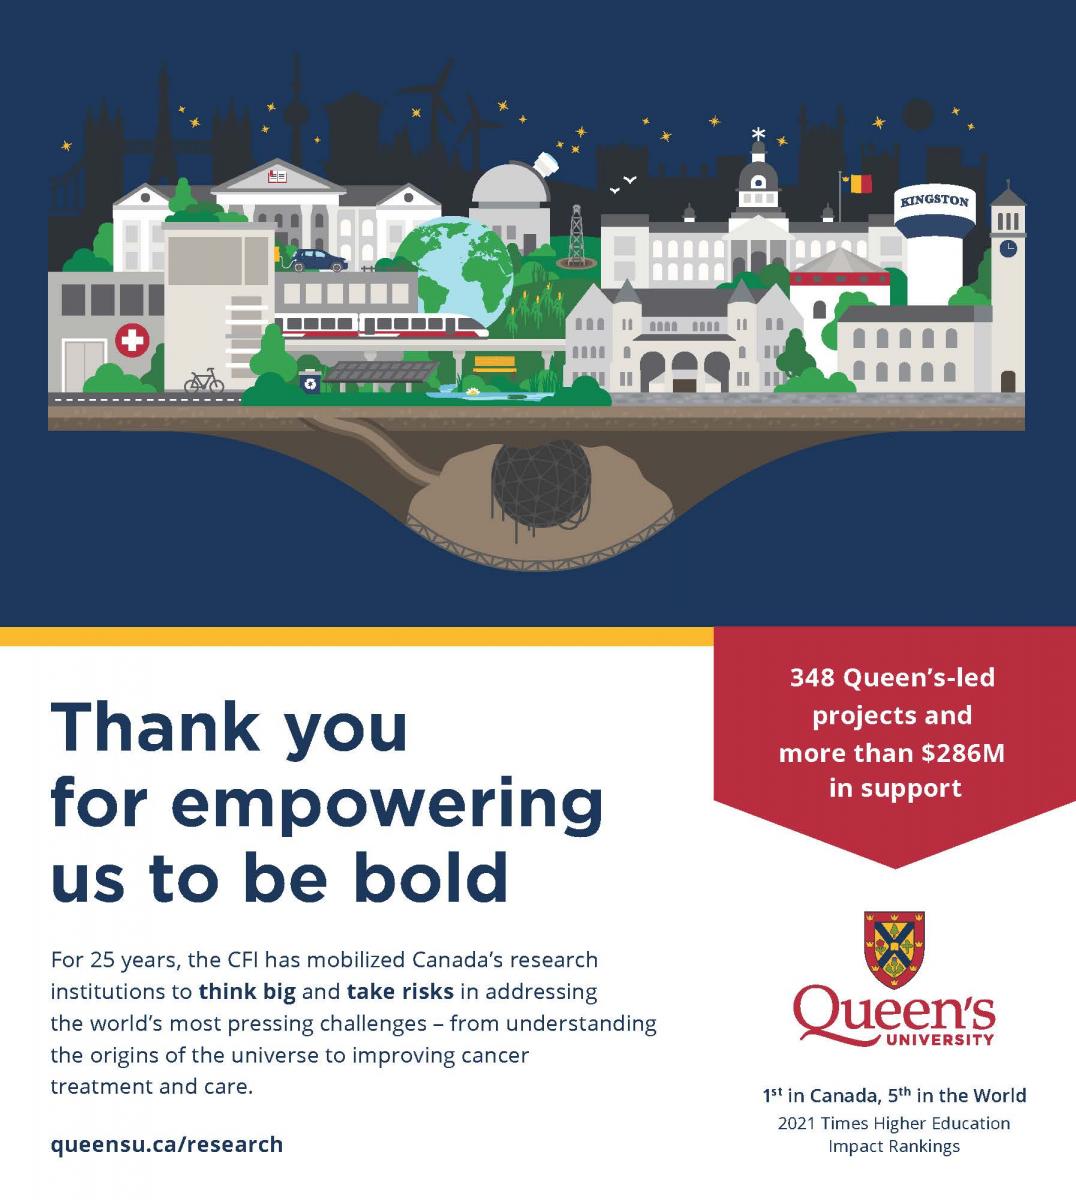 Thank you empowering us to be bold. For 25 years, the CFI has mobilized Canada's research institutions to think big and take risks in addressing the world's most pressing challenges - from understanding the origins of the universe to improving cancer treatment and care. queensu.ca/research]